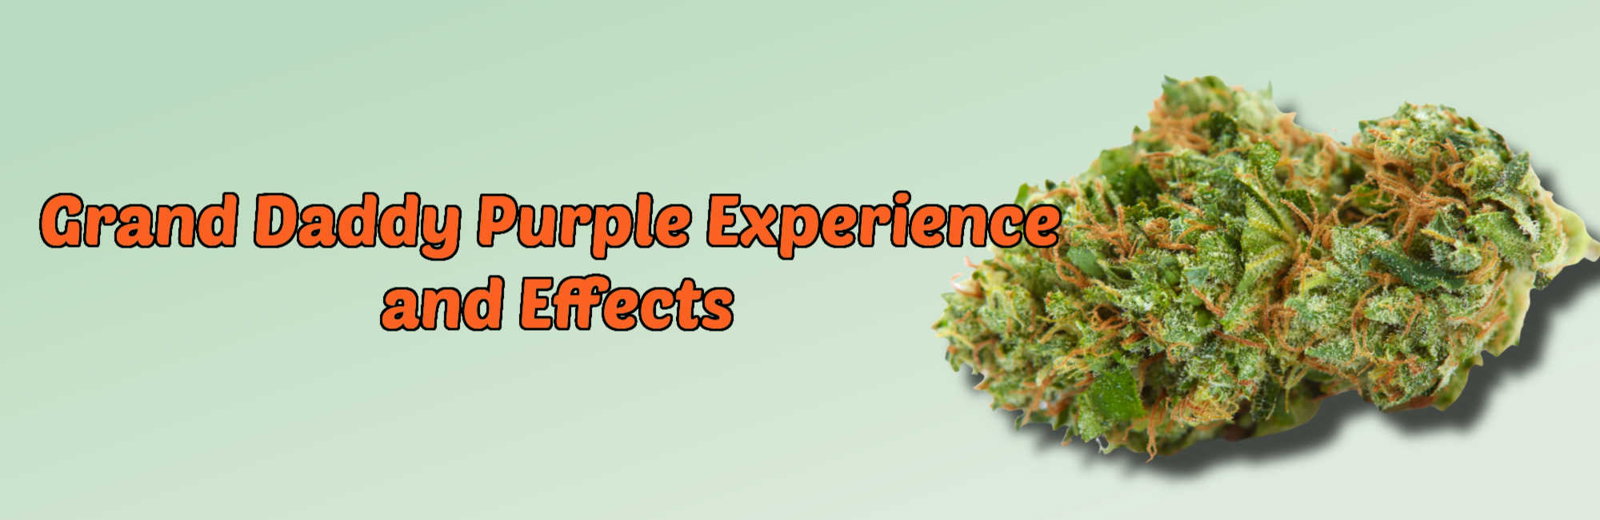 image of grand daddy purple experience and effects